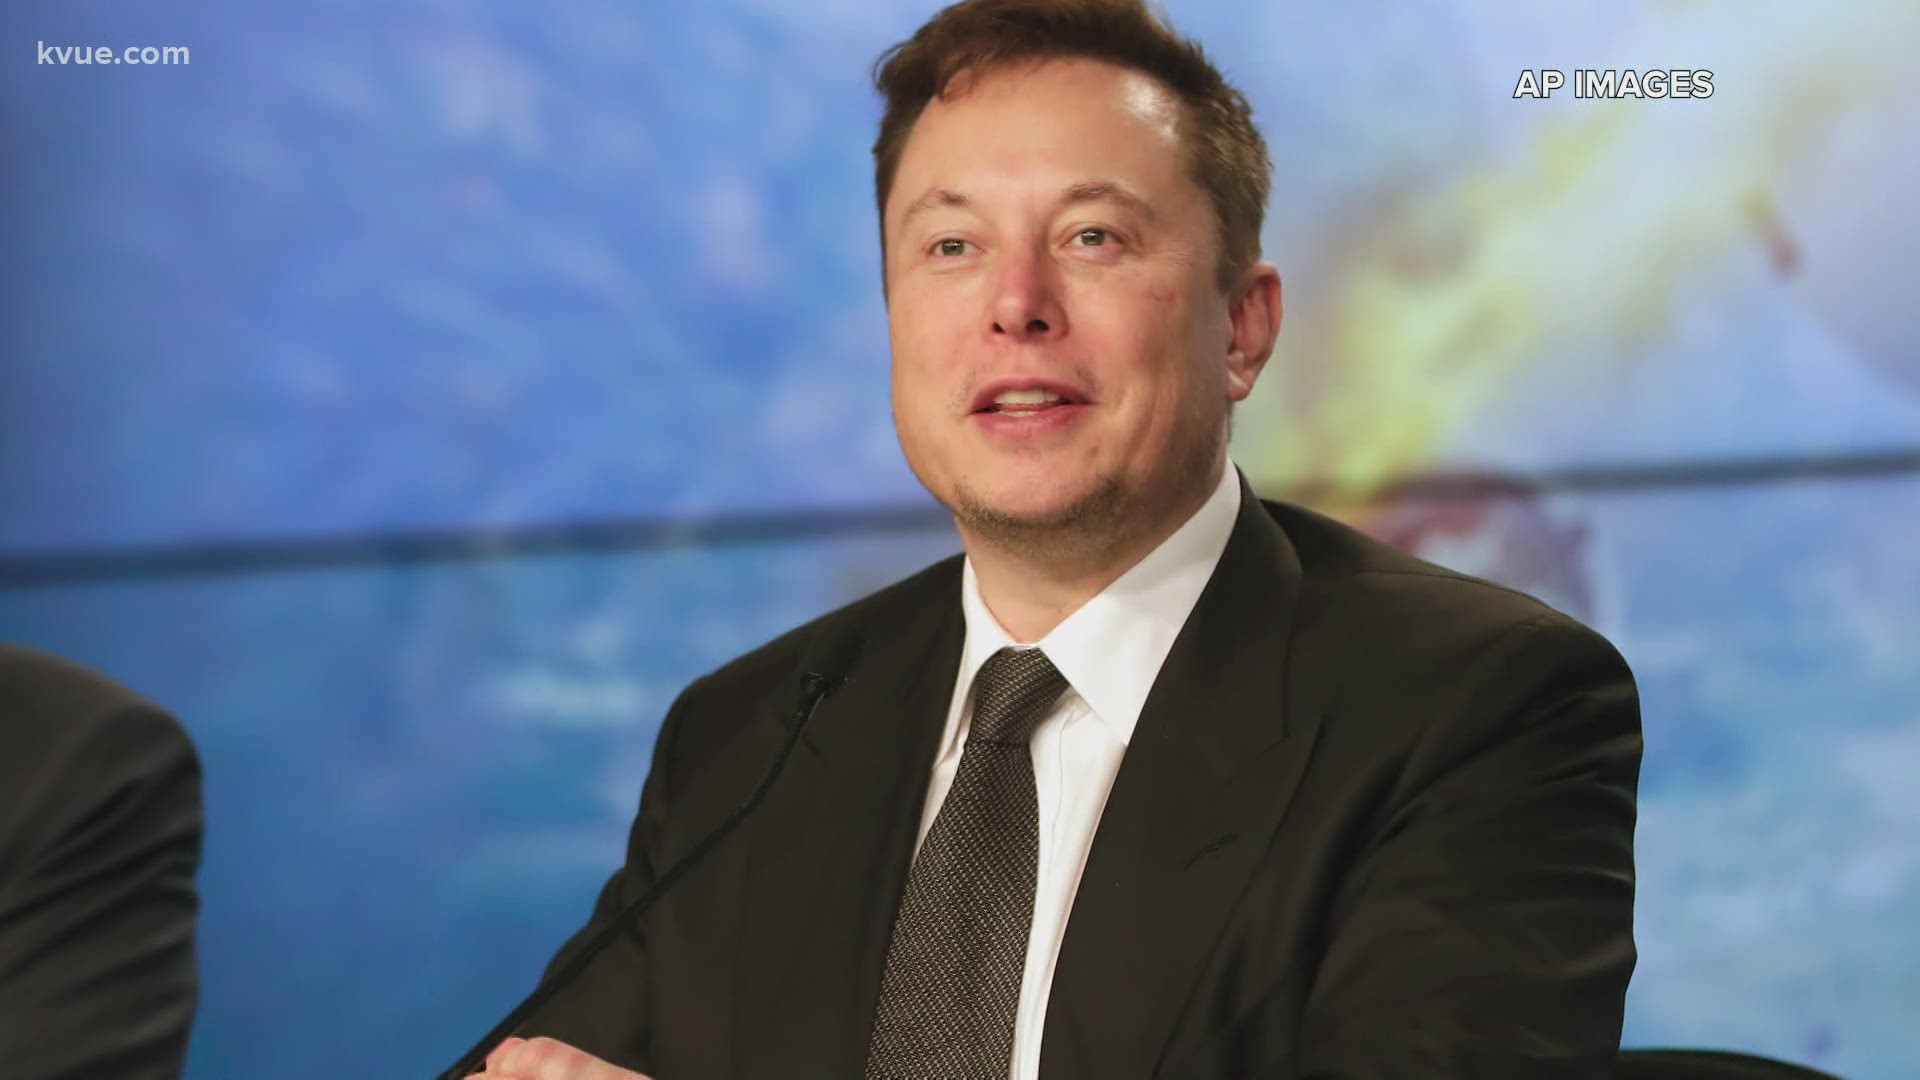 Elon Musk could be the next executive to call Texas home, reports say.